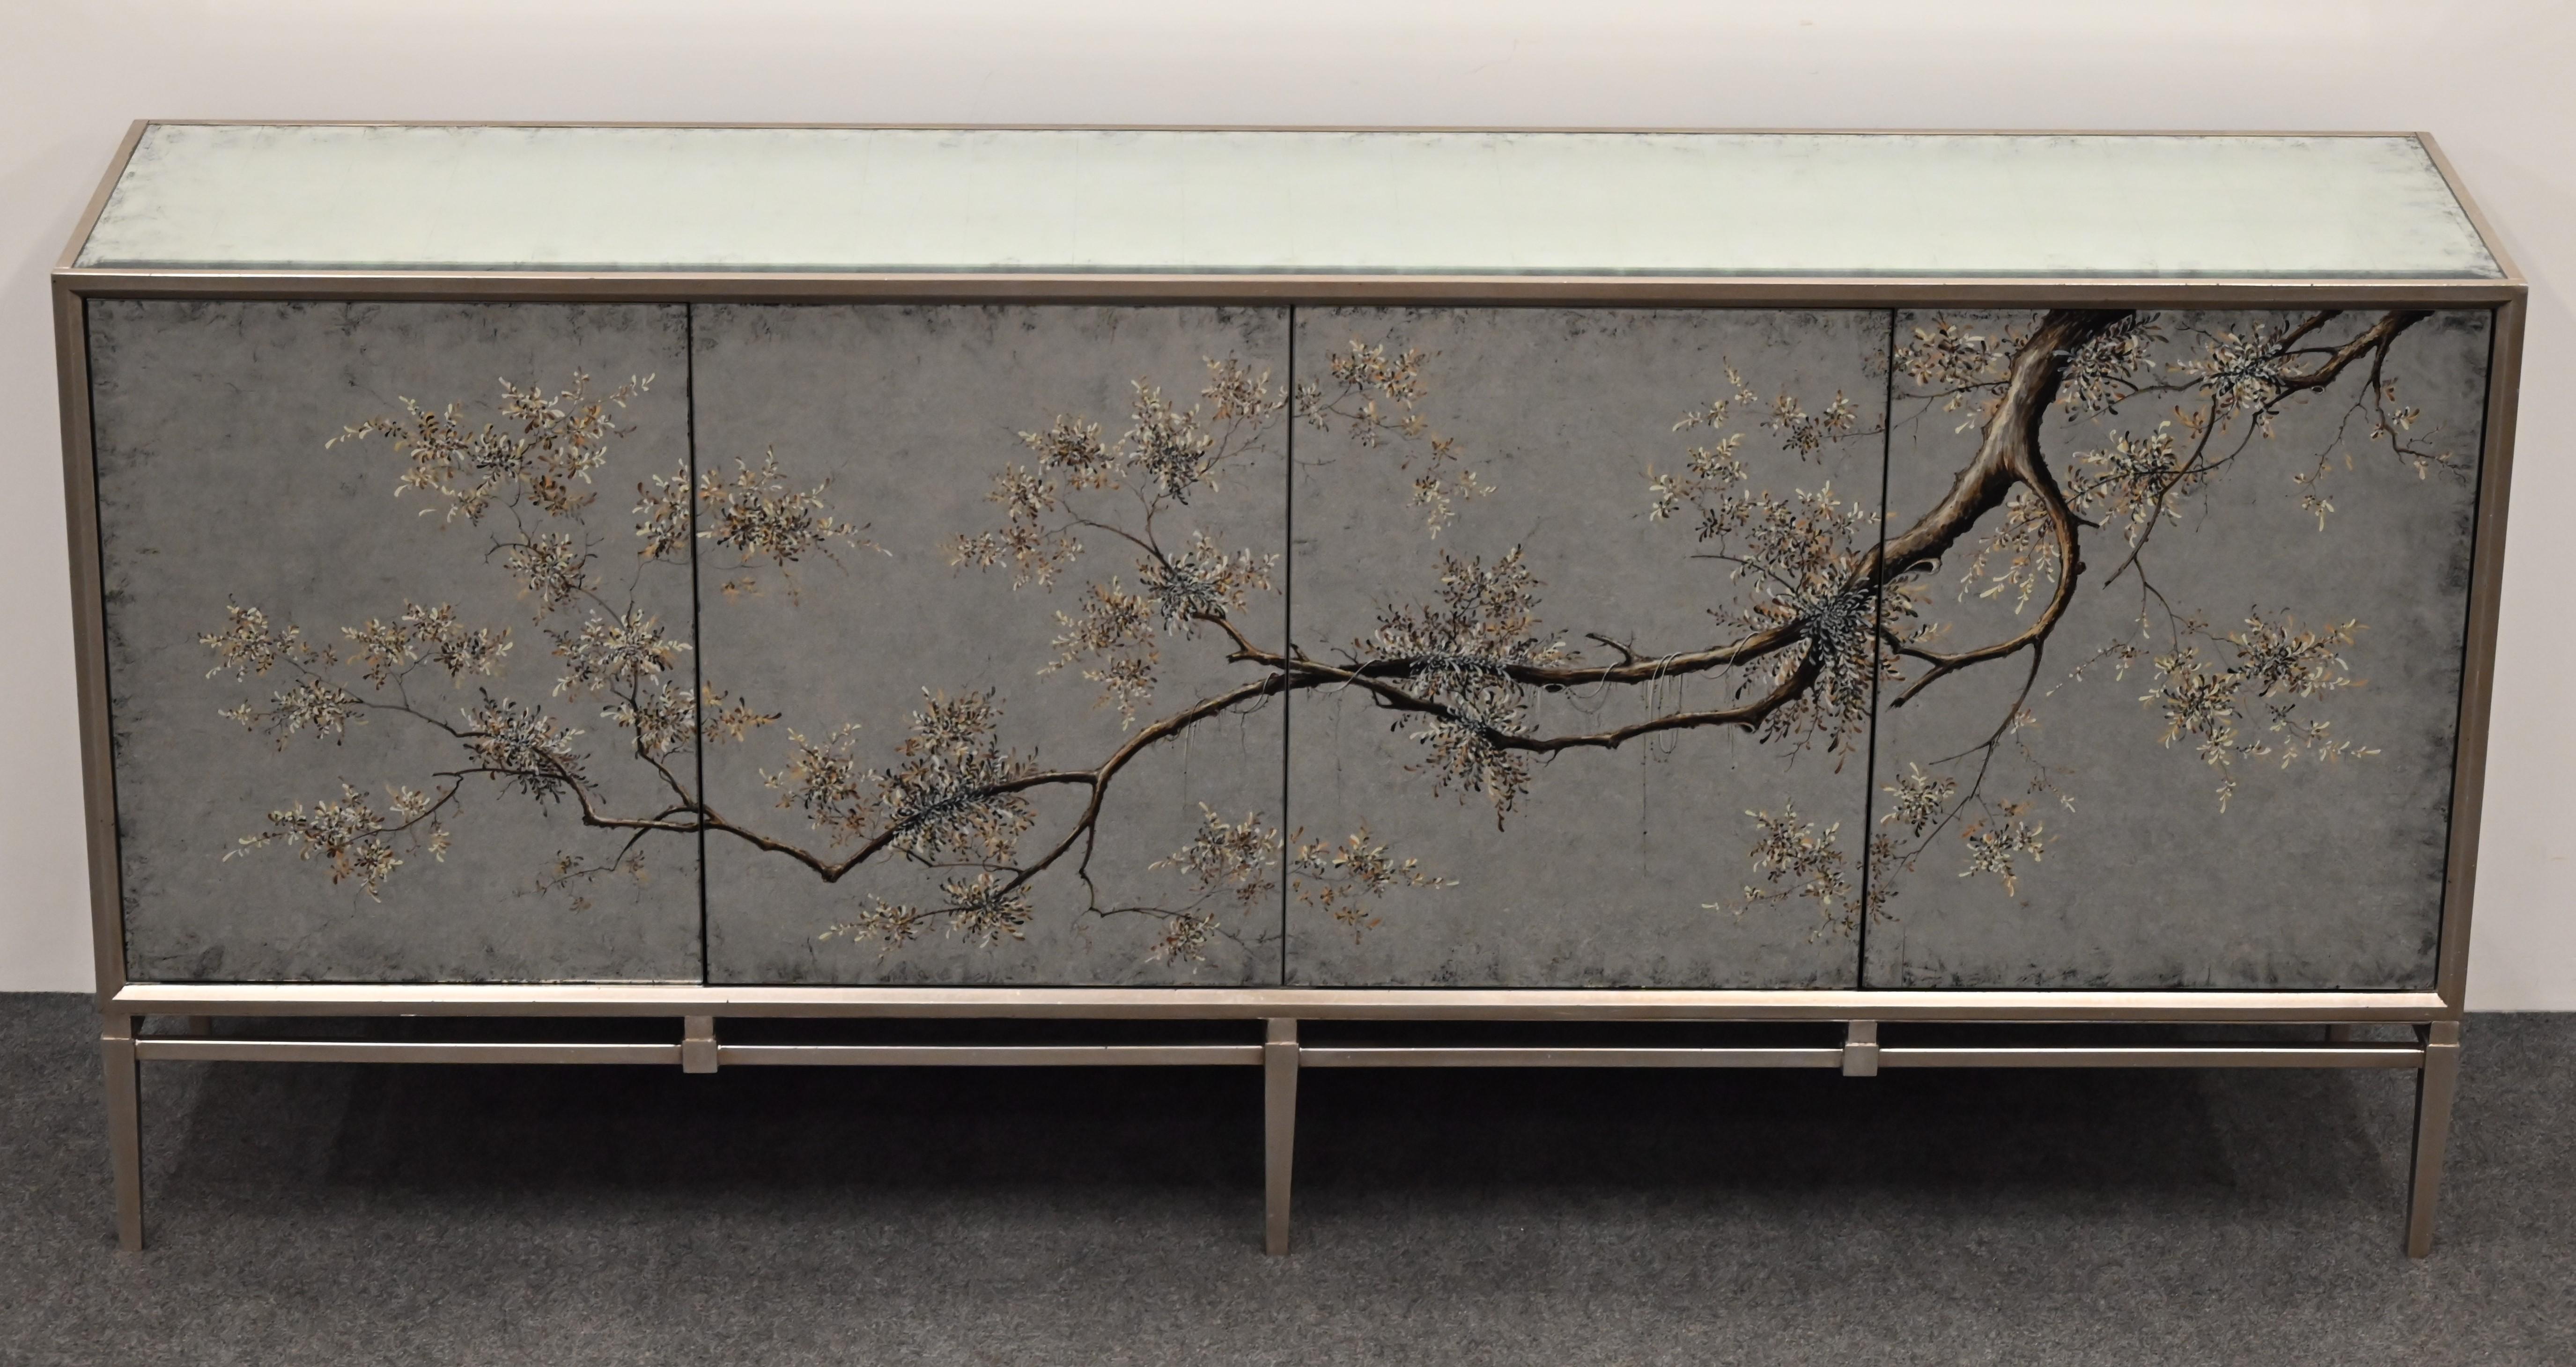 A beautiful contemporary credenza or sideboard by John Richards made of egliomese and mirror (reverse painted). This gorgeous piece was preowned and now available at a much-reduced price from the original price of $9200. It is in beautiful original